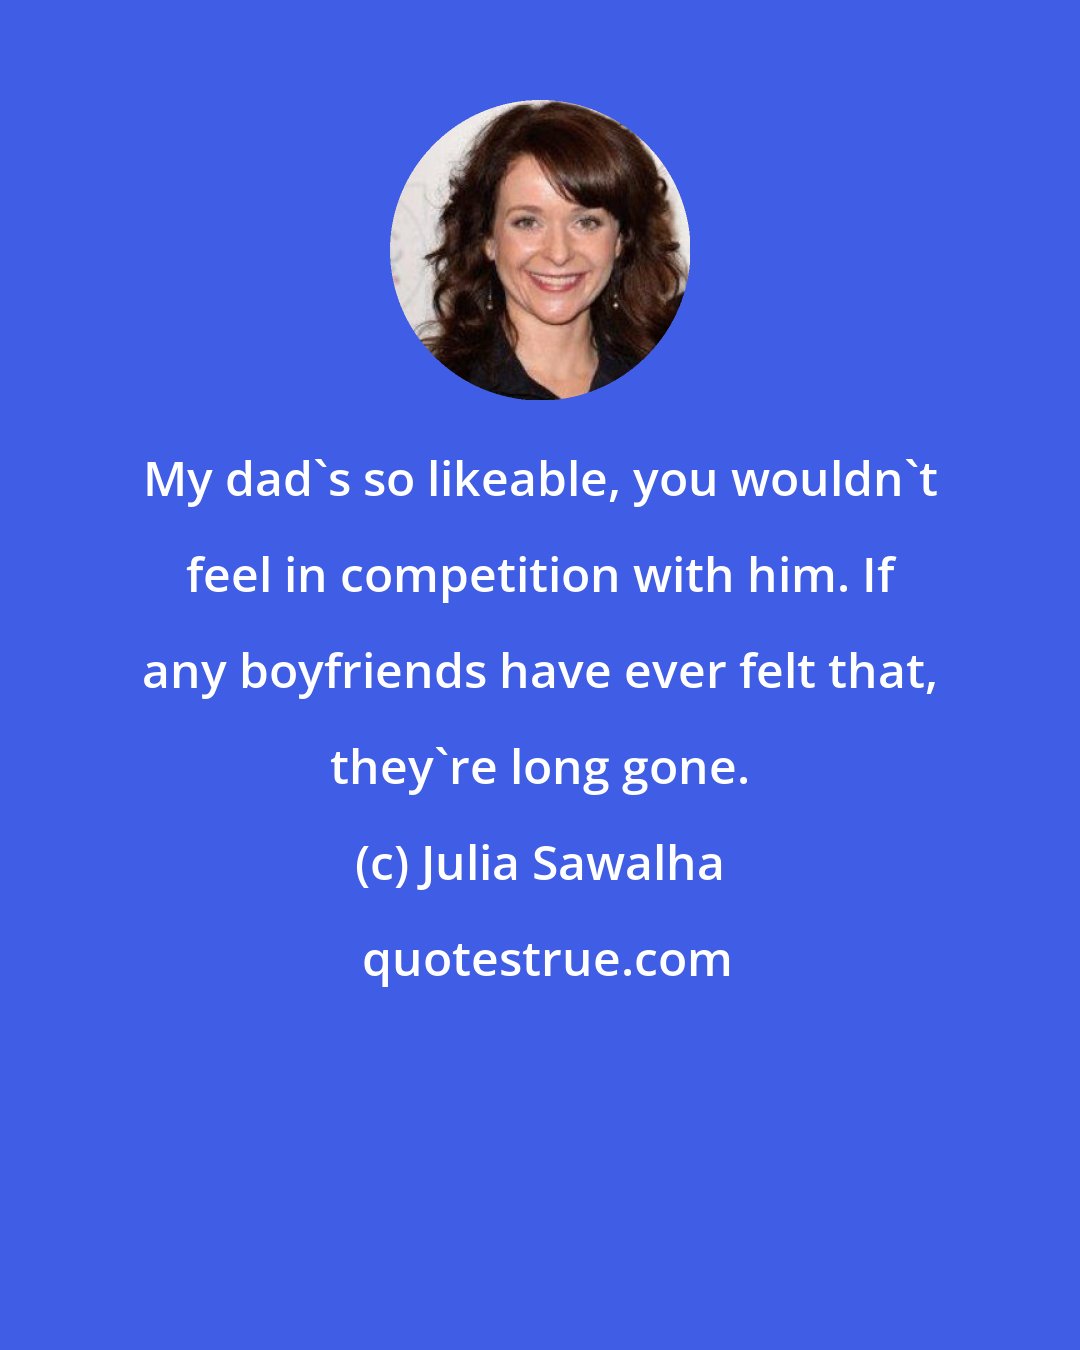 Julia Sawalha: My dad's so likeable, you wouldn't feel in competition with him. If any boyfriends have ever felt that, they're long gone.